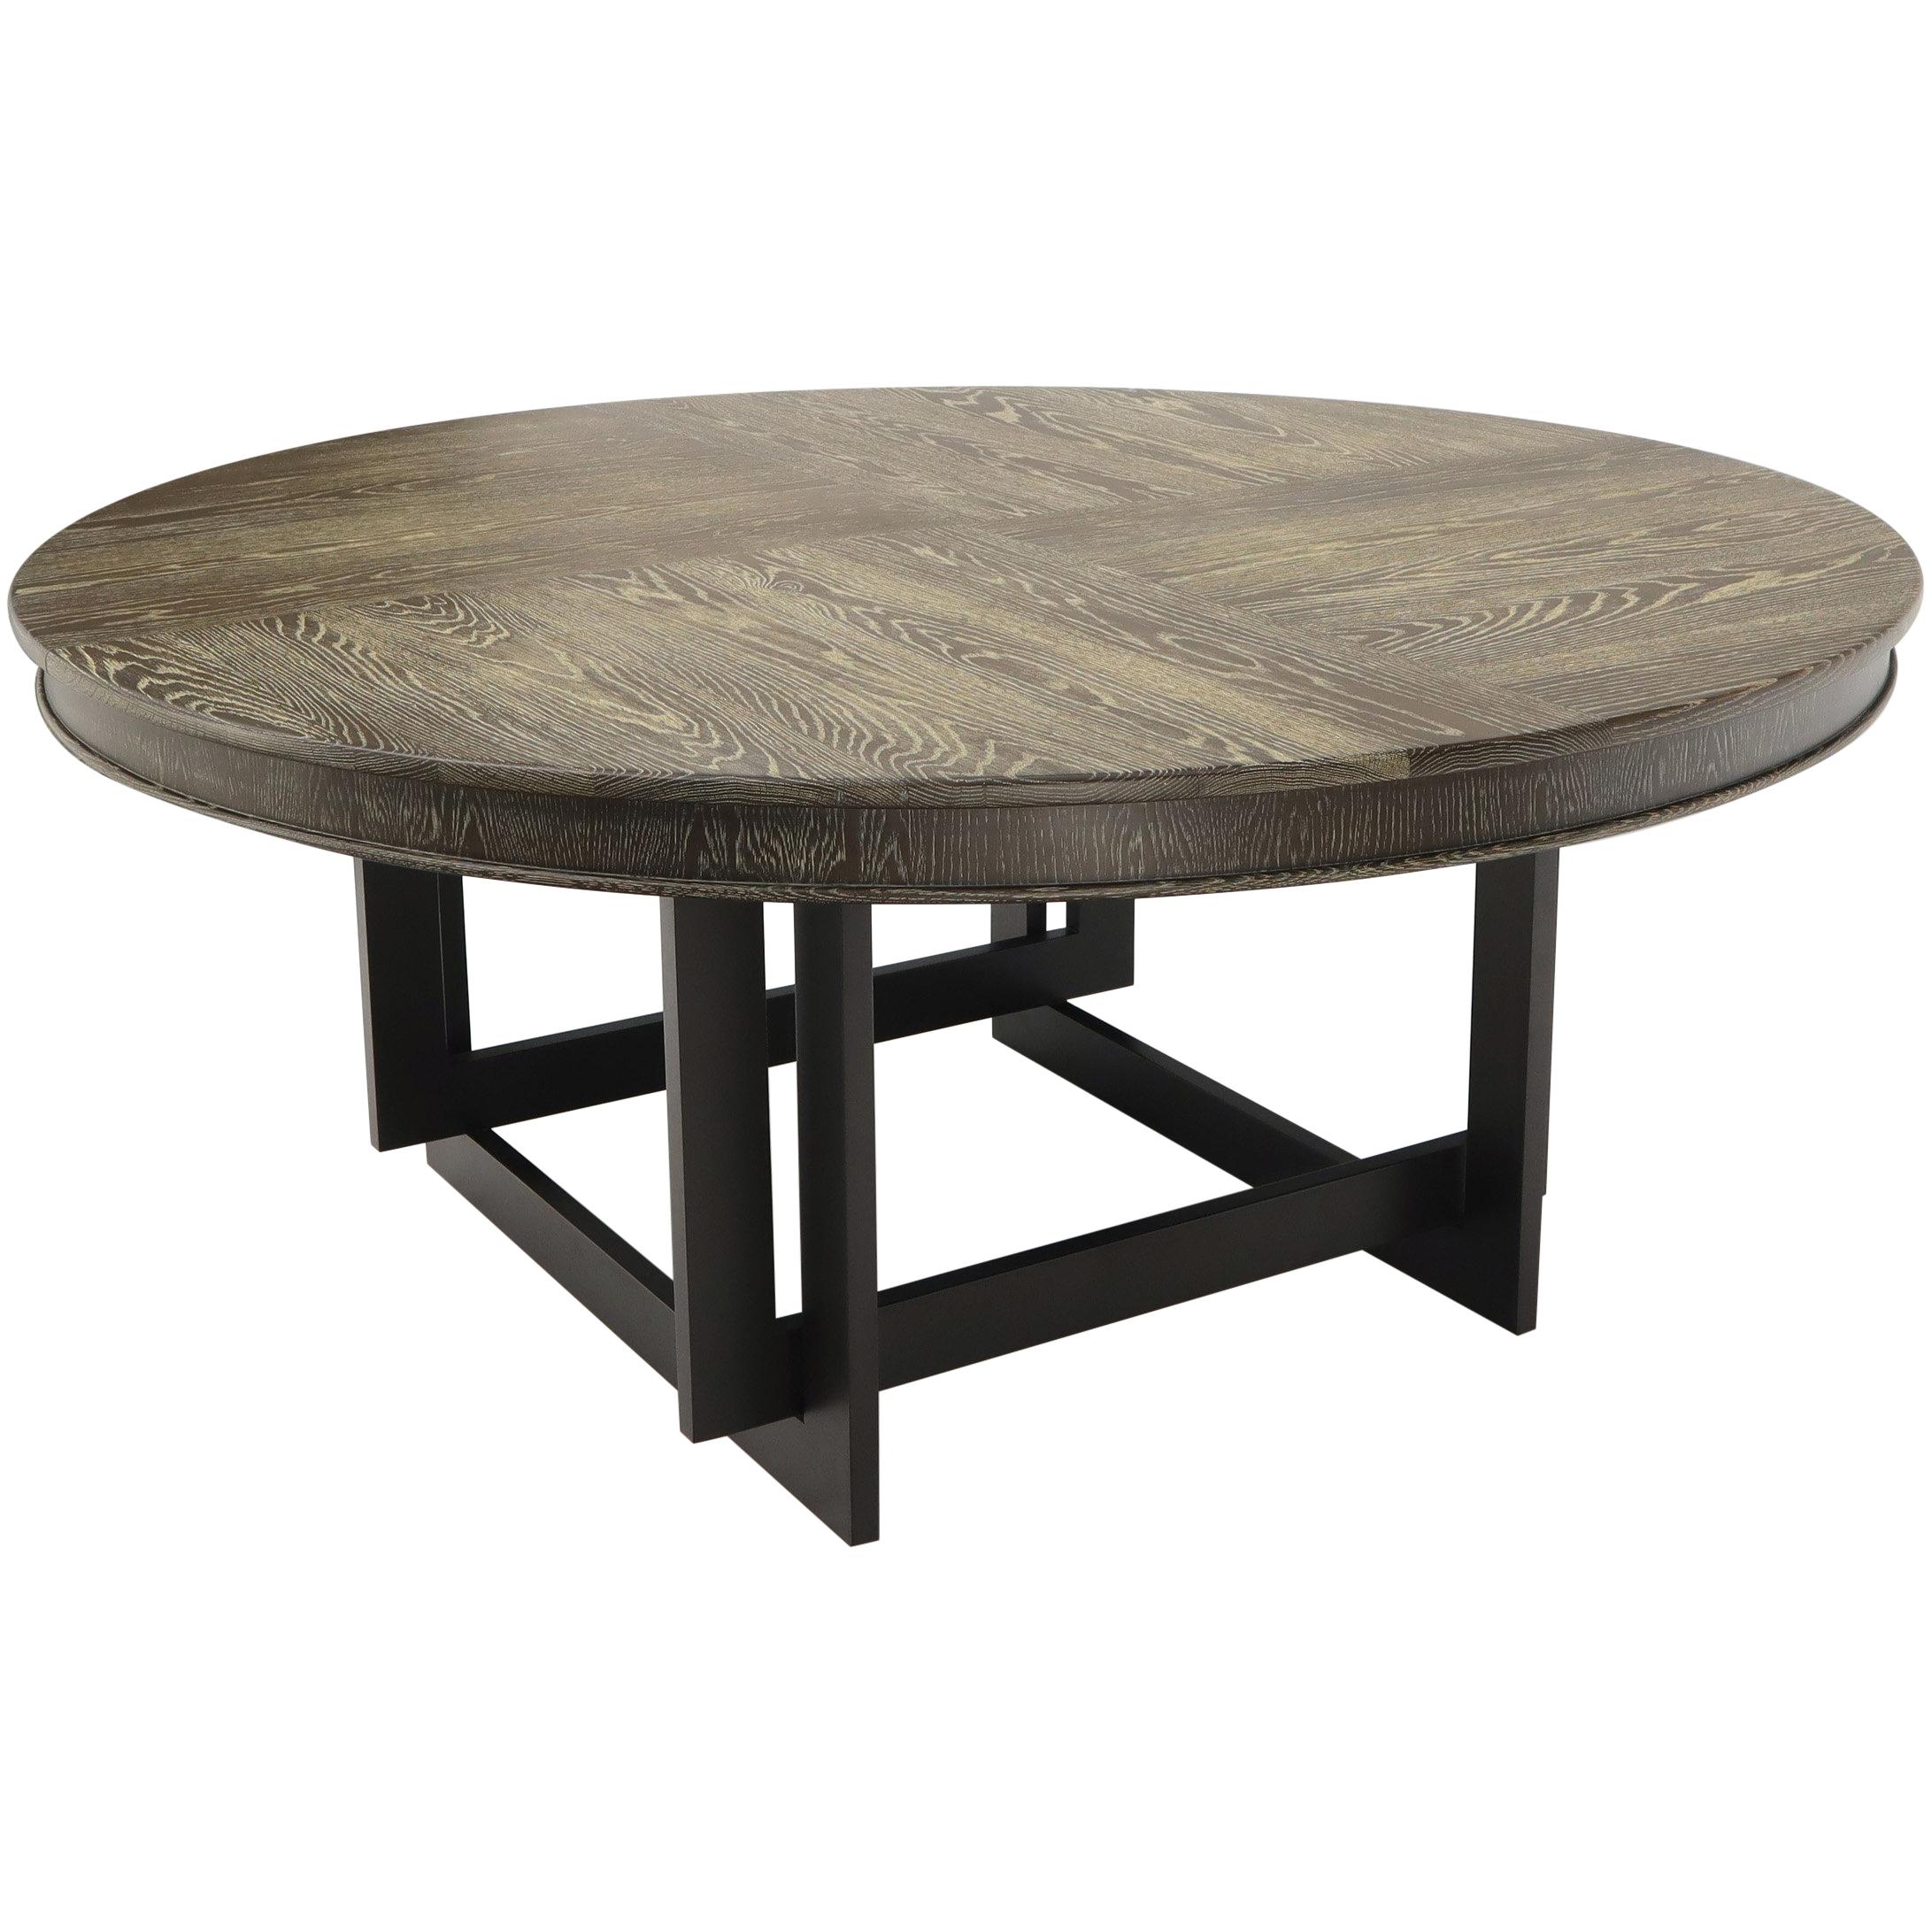 Large Oversize in Diameter Round Cerused Limed Oak Dining Table